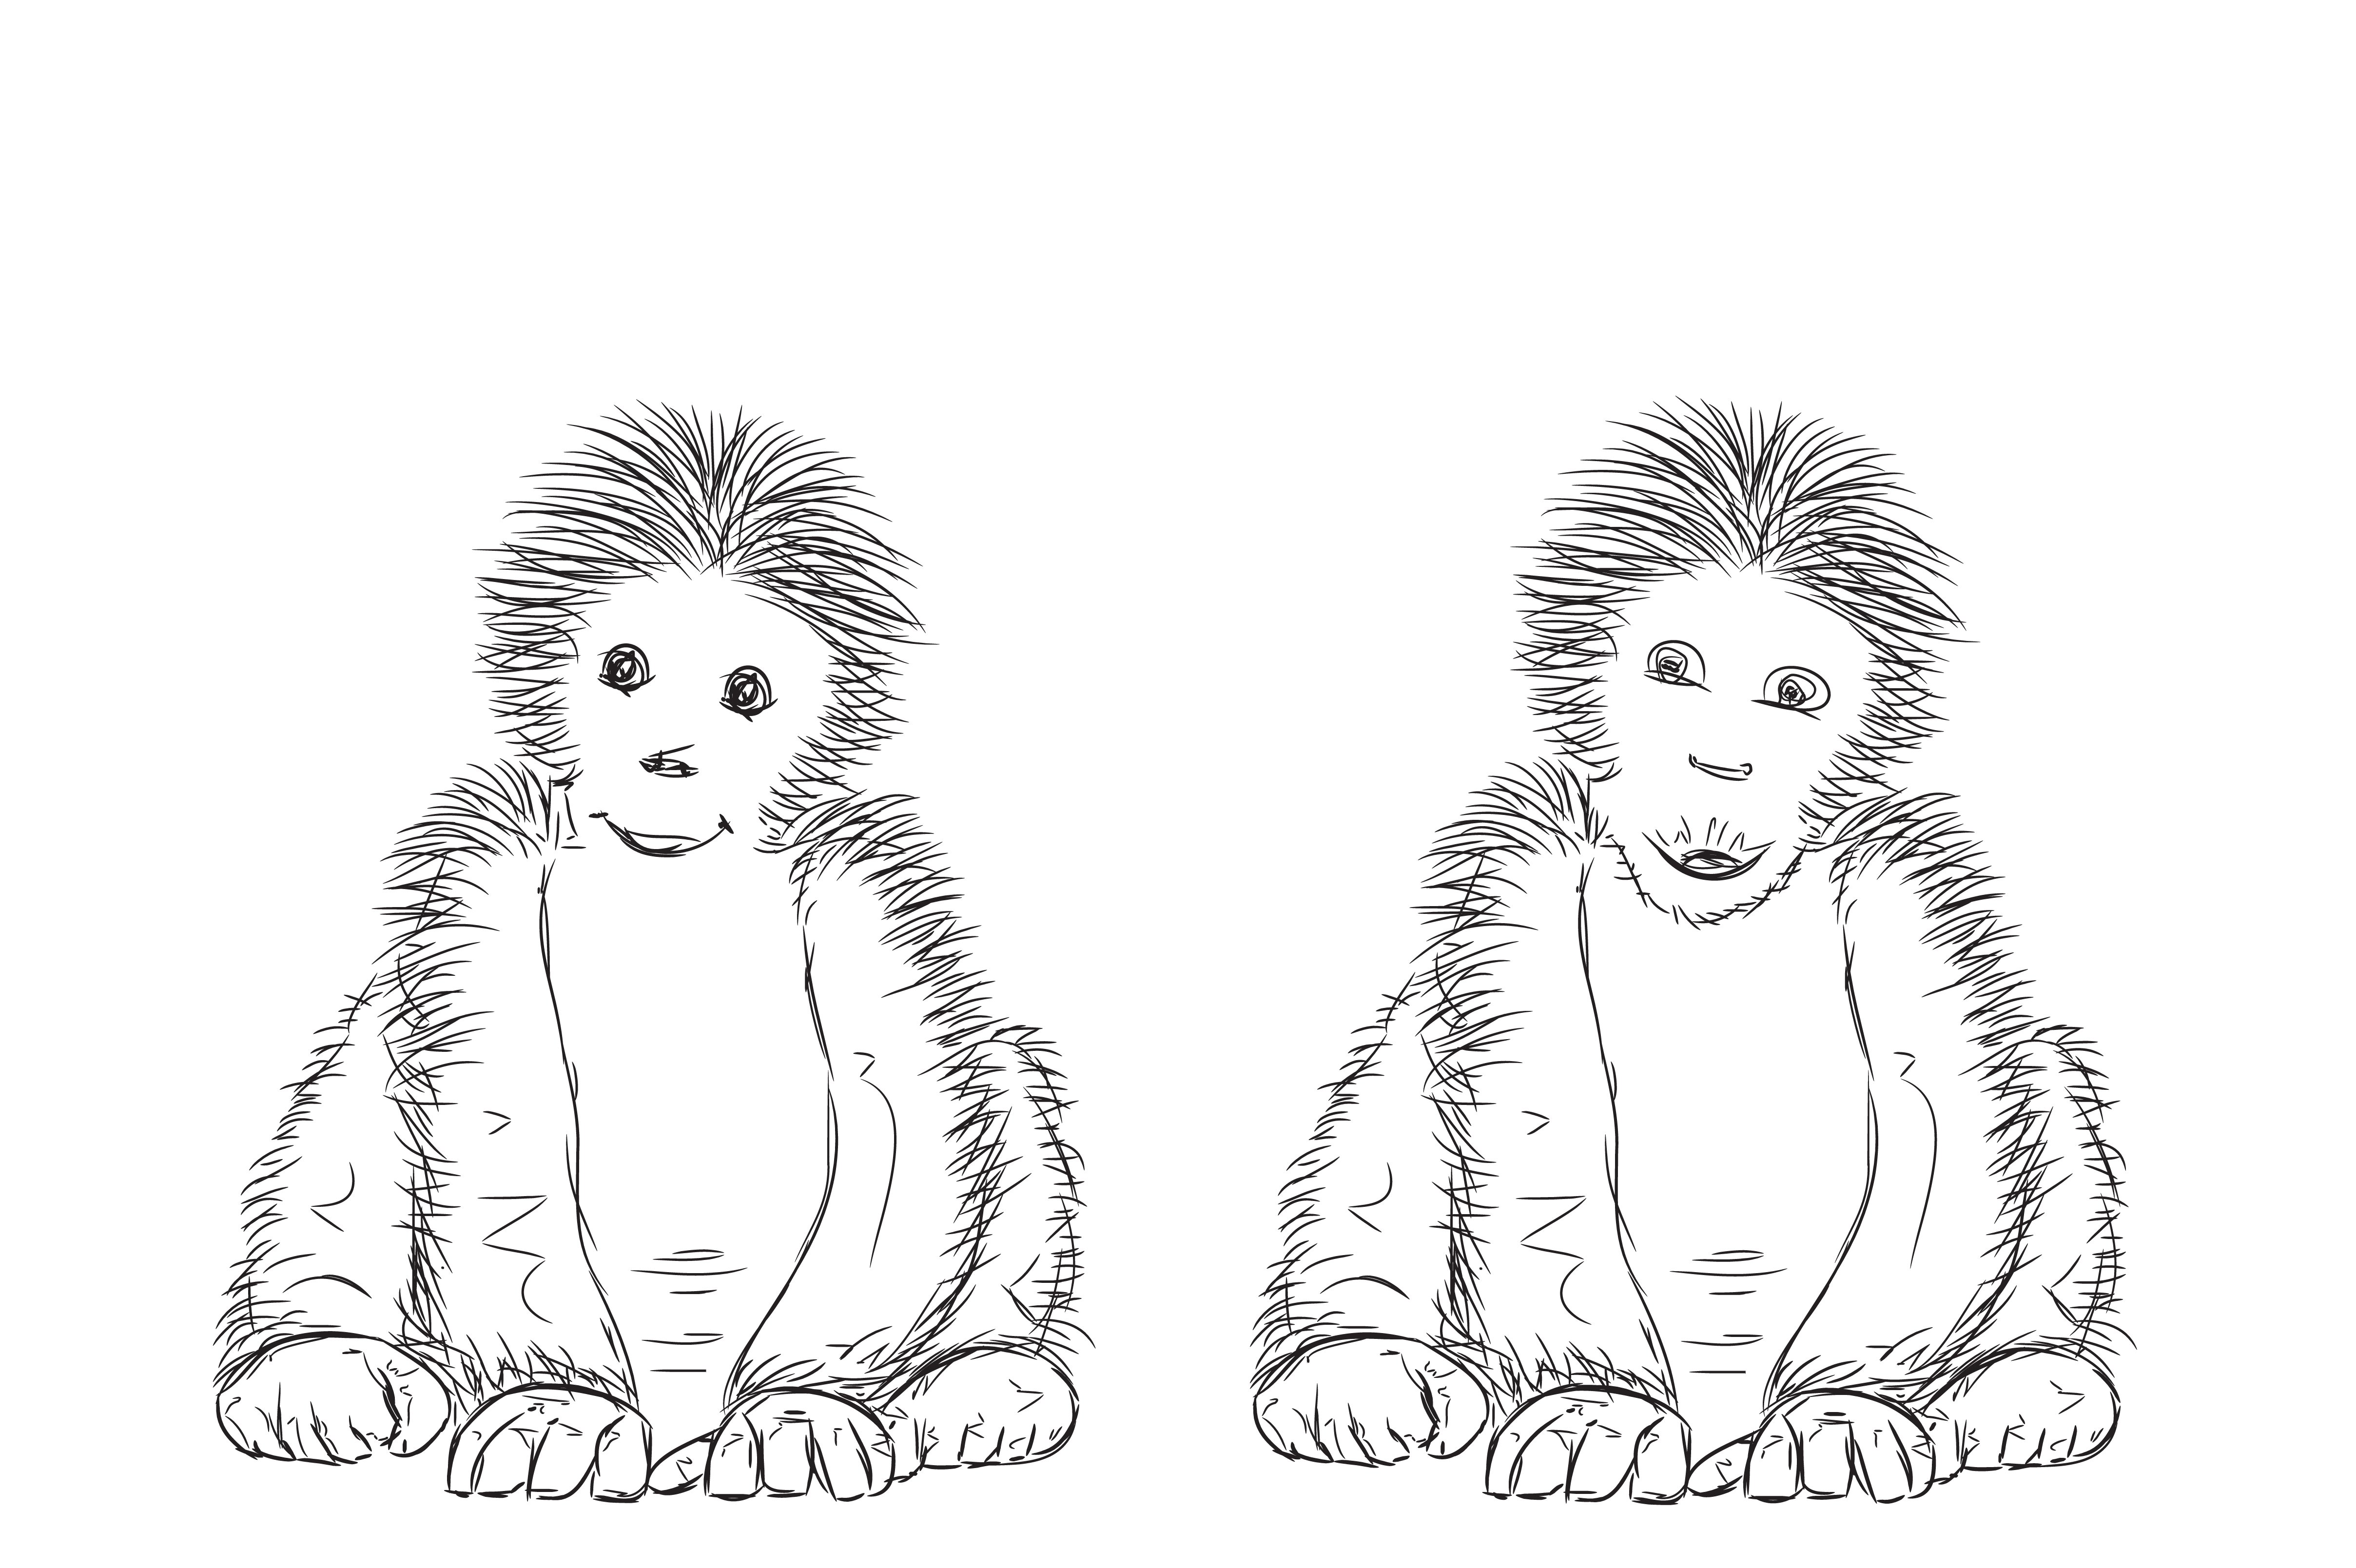 Small and Old Gorilla. Monkey cover image.